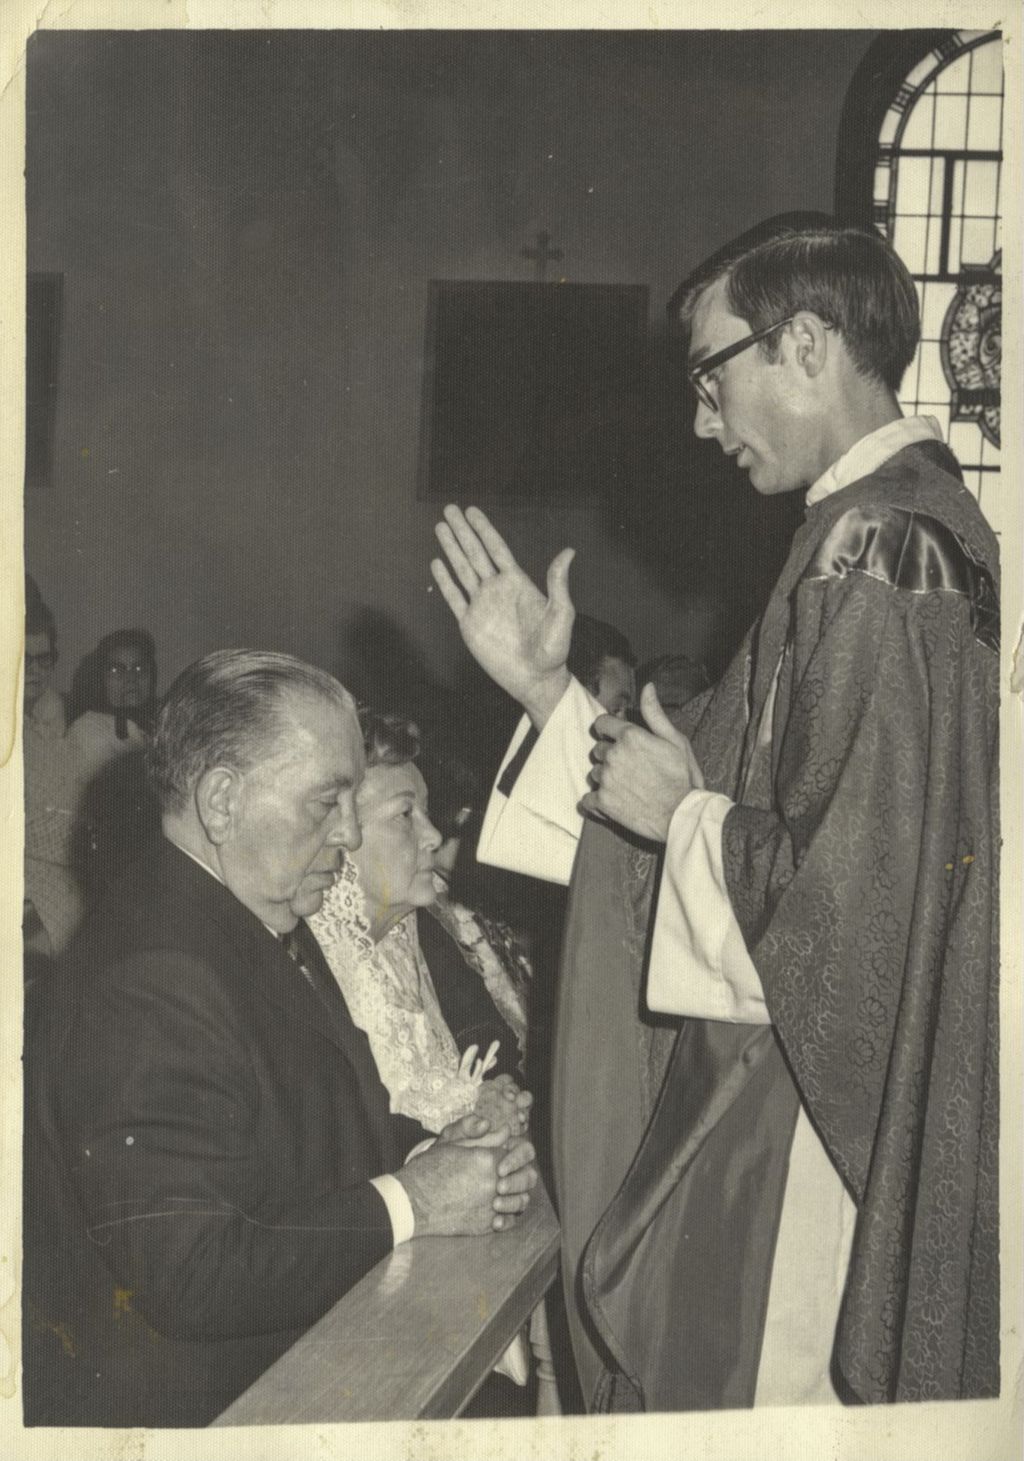 Miniature of Richard J. and Eleanor Daley receive a blessing from a priest